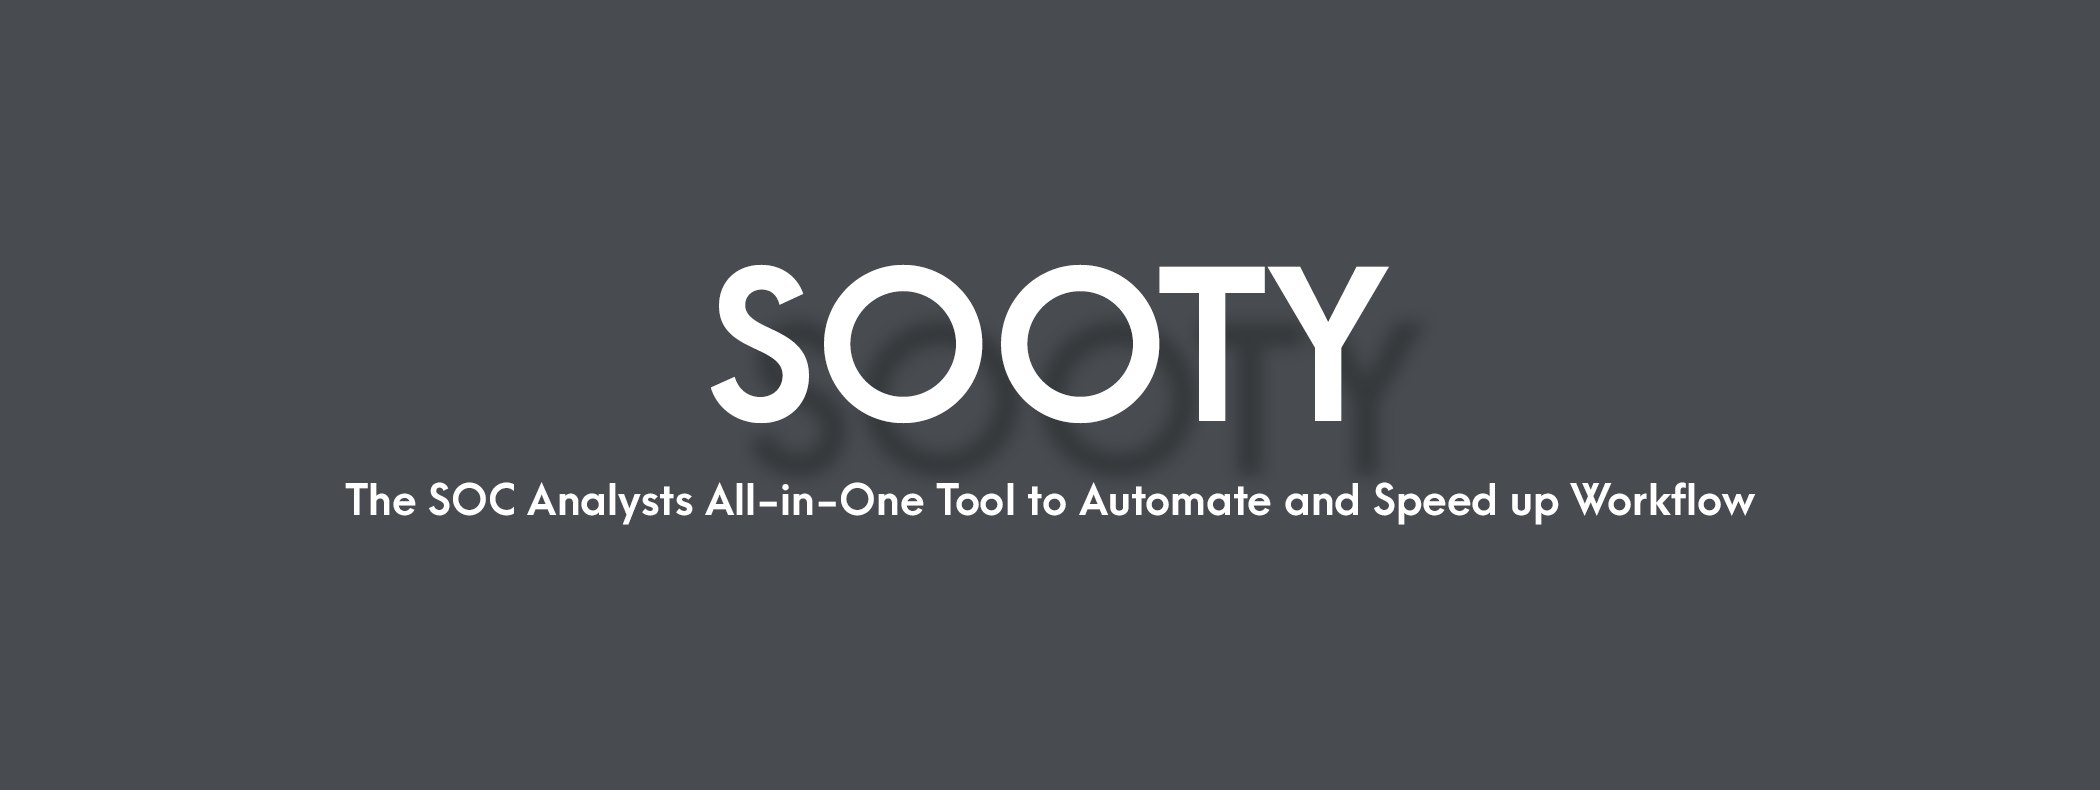 sooty_logo.png